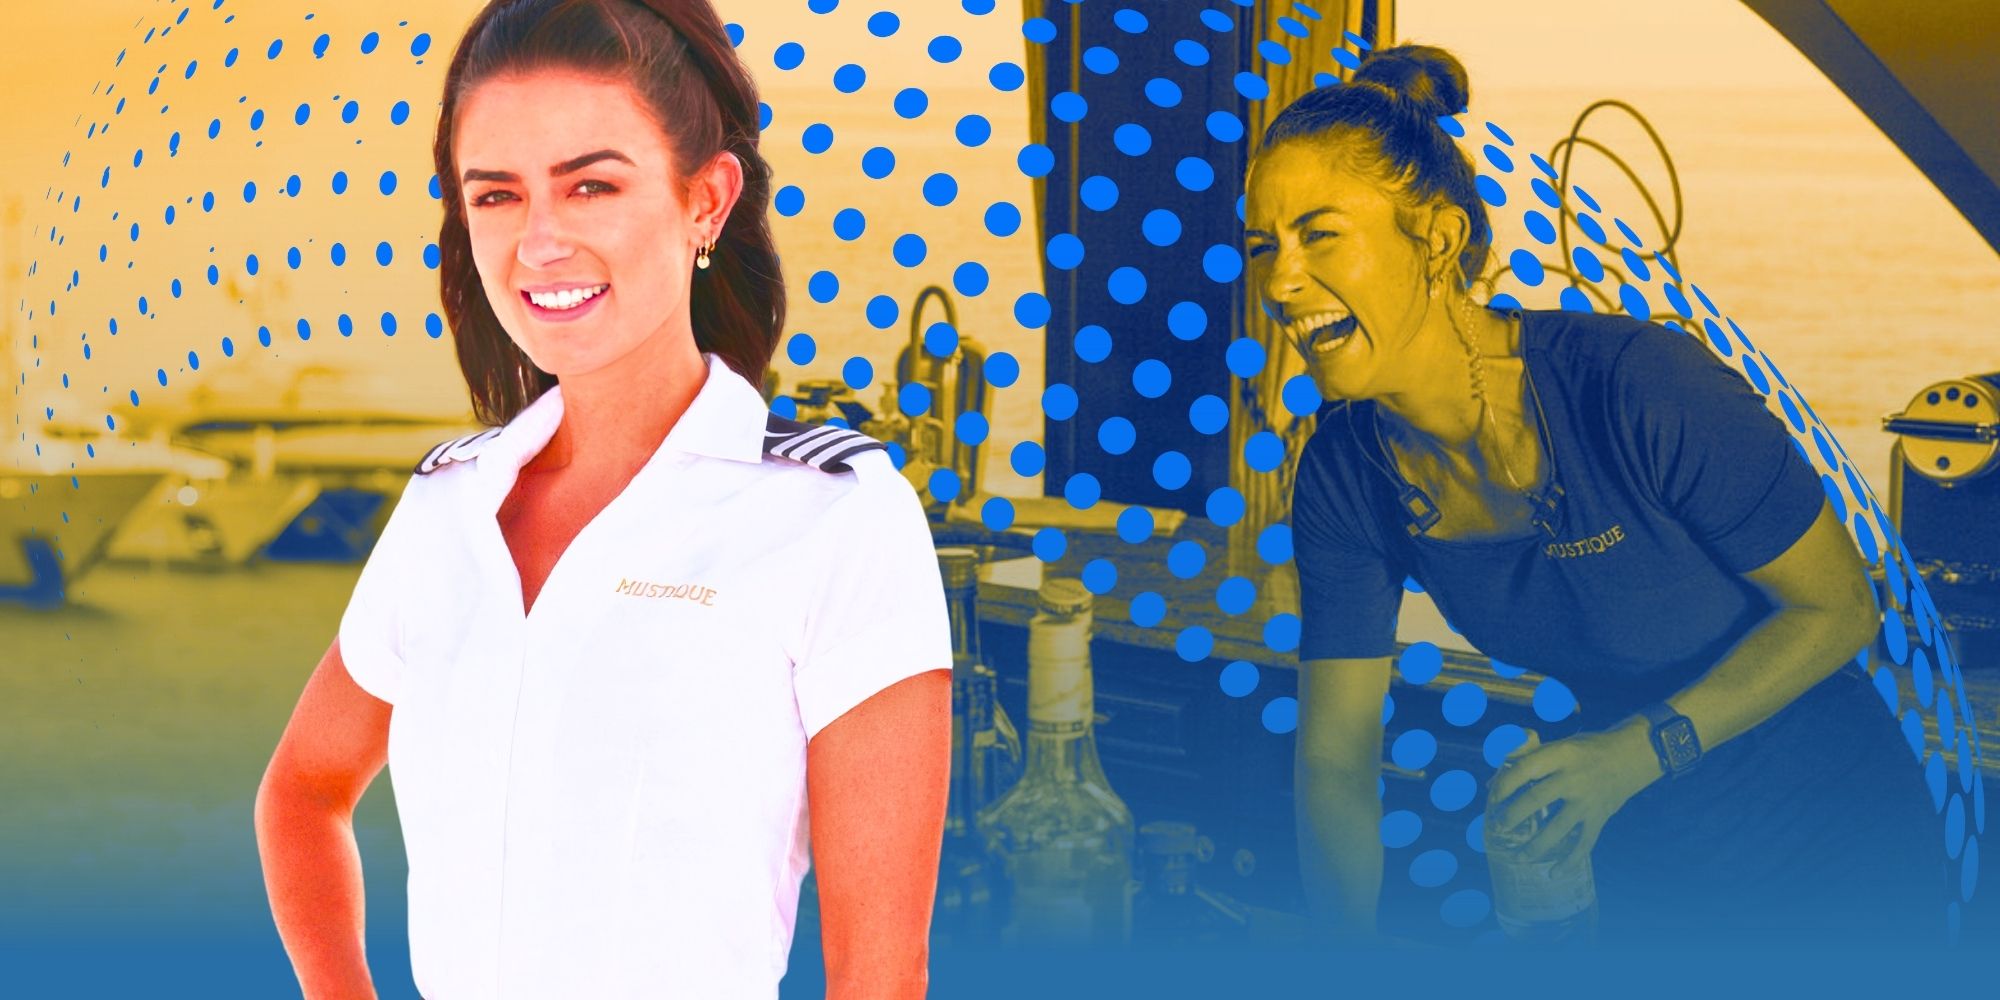  Aesha with a Below Deck Med wearing a white uniform and laughing in the background